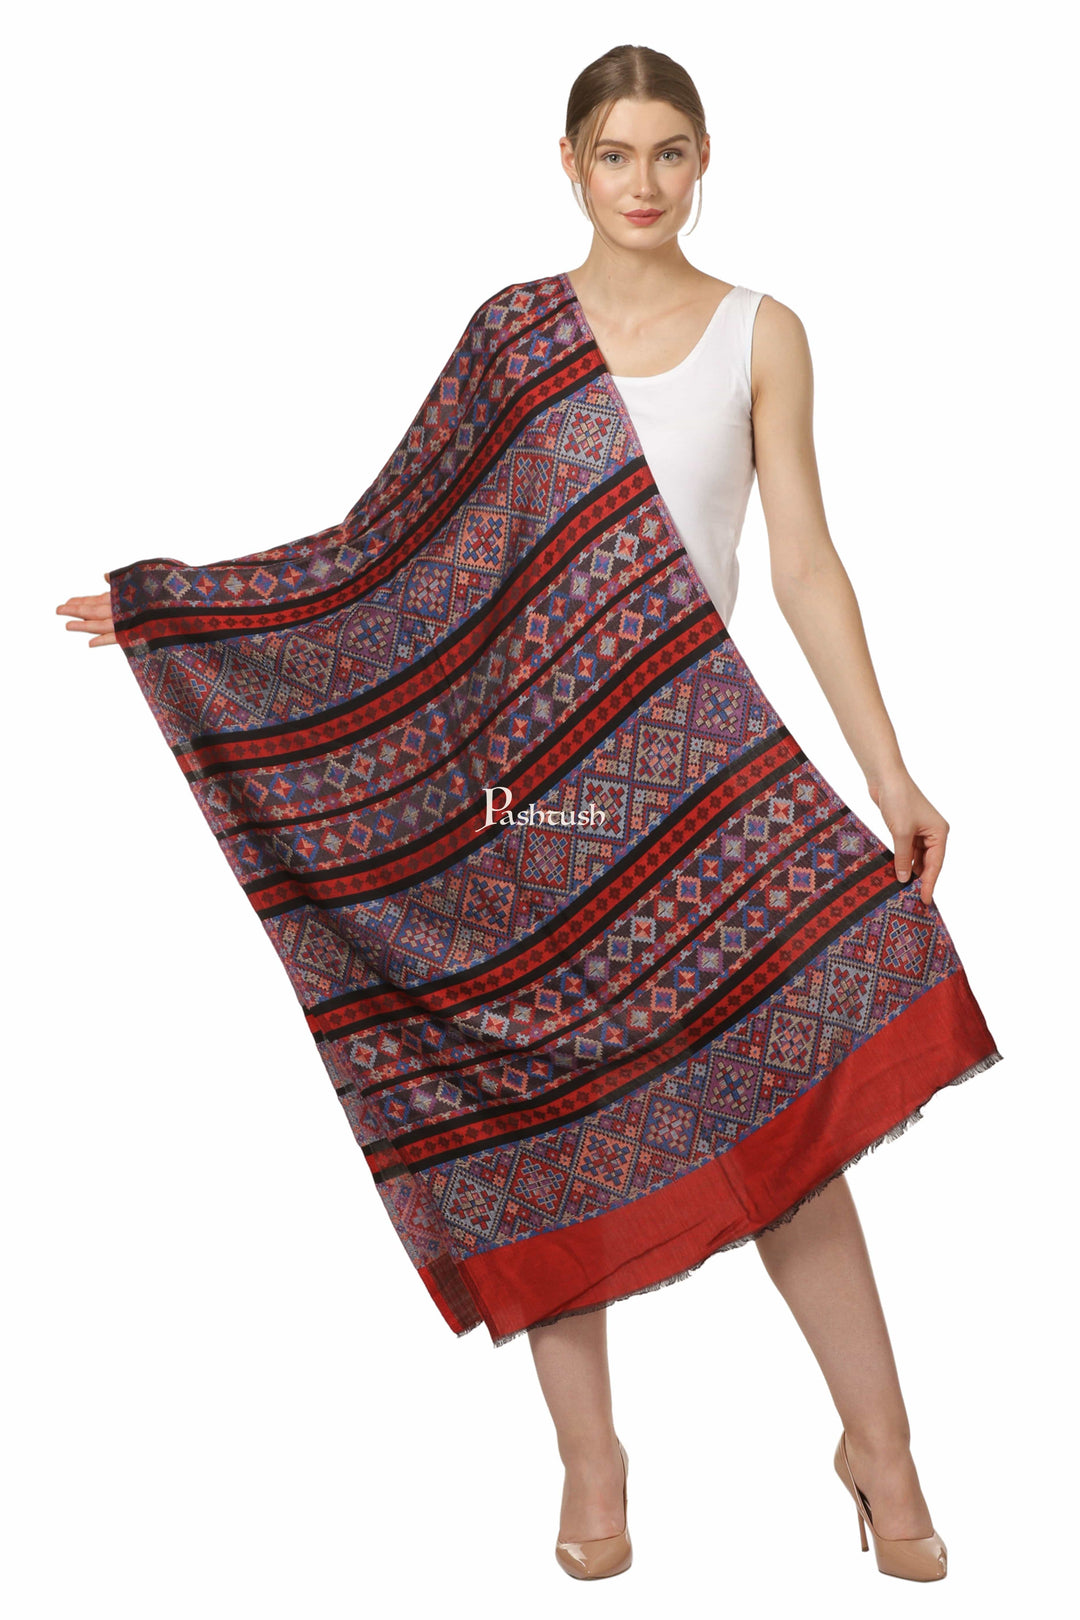 Pashtush India Gift Pack Pashtush His And Her Gift Set Of Bamboo Weave Stoles With Premium Gift Box Packaging, Blue and Red